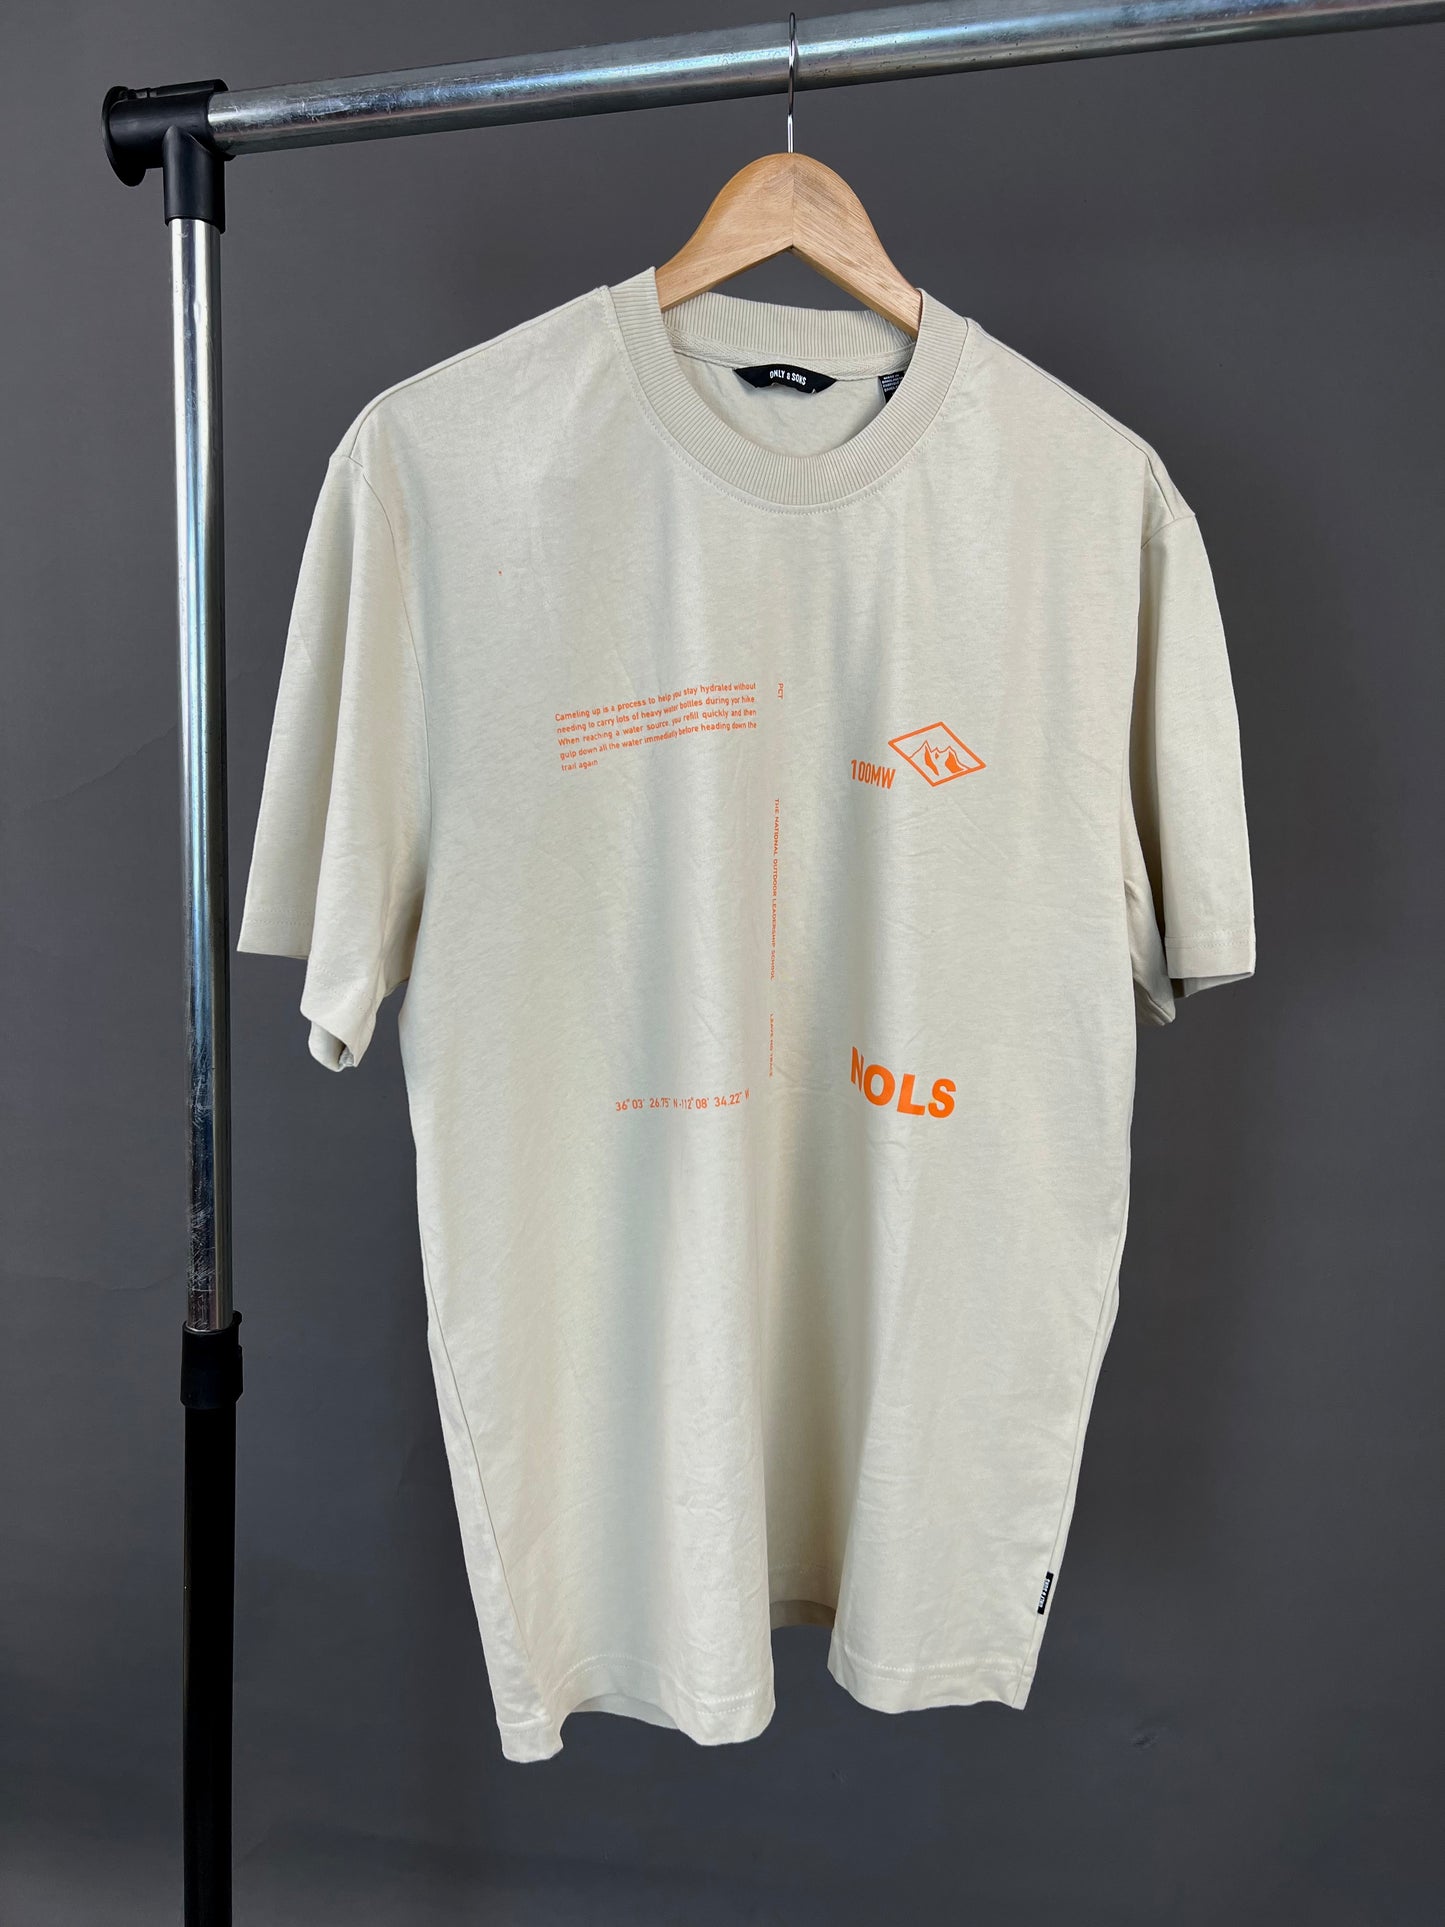 Only & Sons NOLS T-shirt